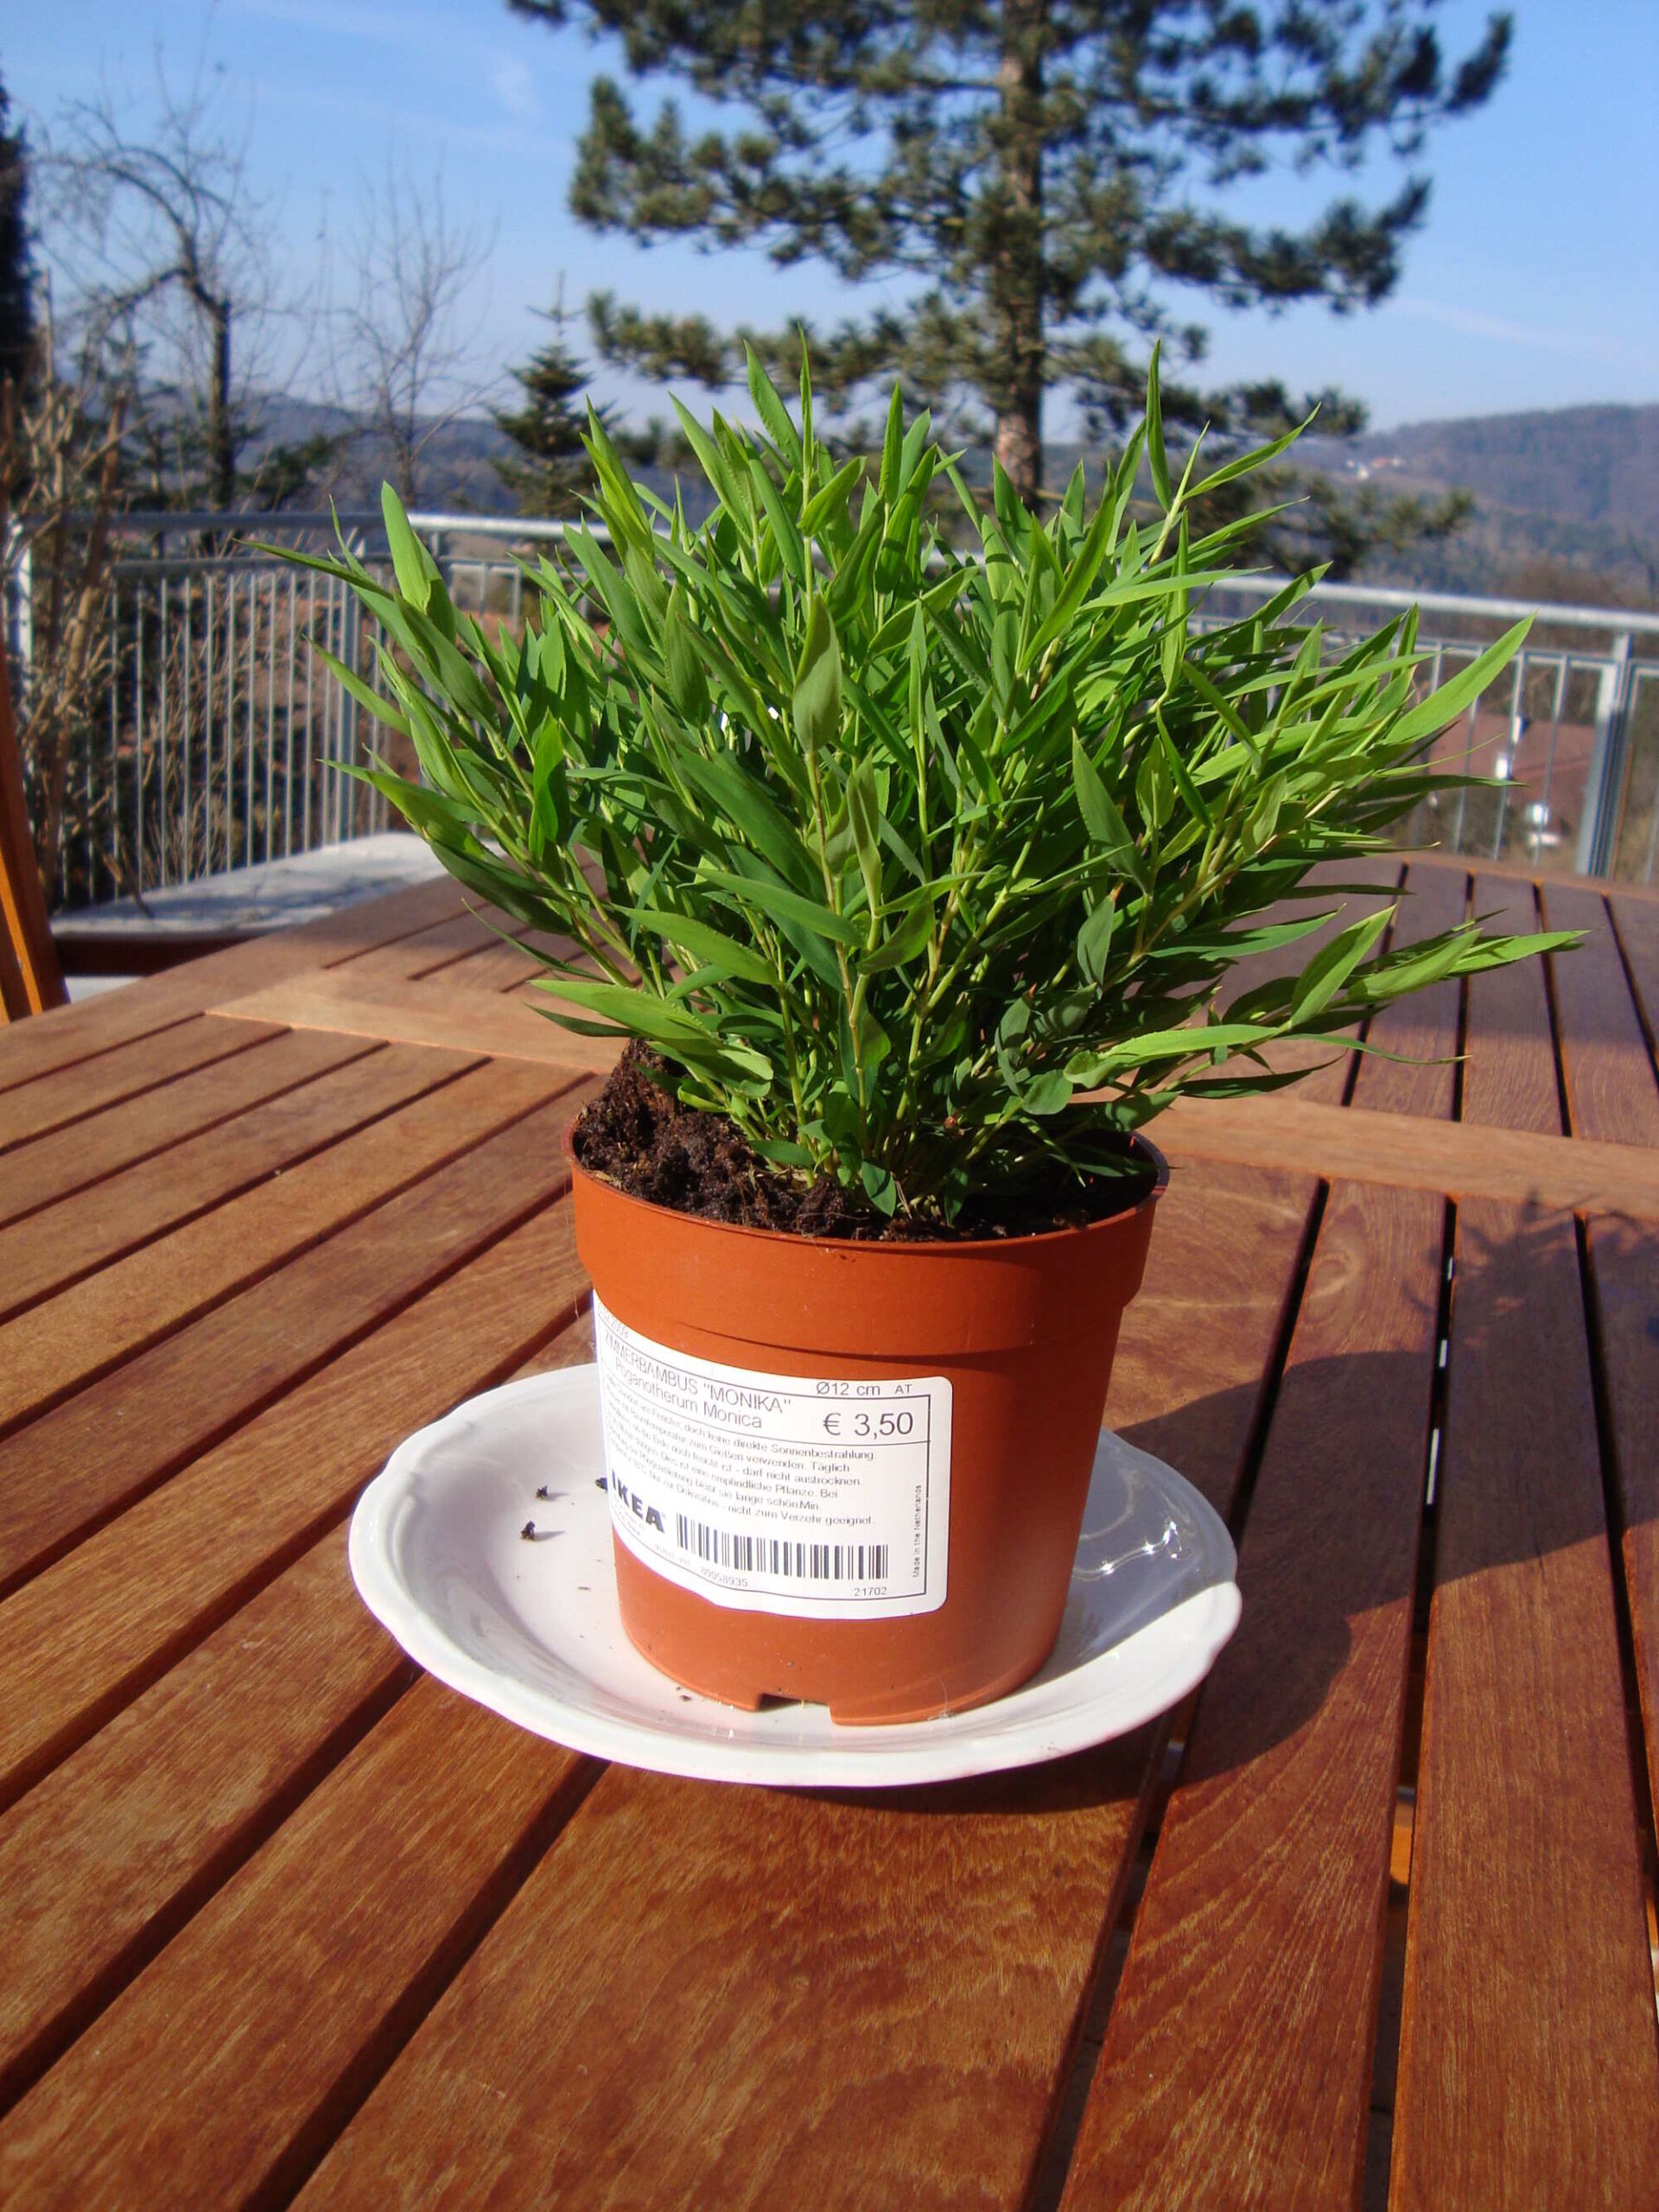 Photograph of baby bamboo grass growing in a plastic pot outdoors. The photo shows a small clump of grass in a brown plastic pot with a label on it. The pot has been placed on a white dish, which sits on the top of a wooden surface. Metal railing and a pine tree can be seen in the background.